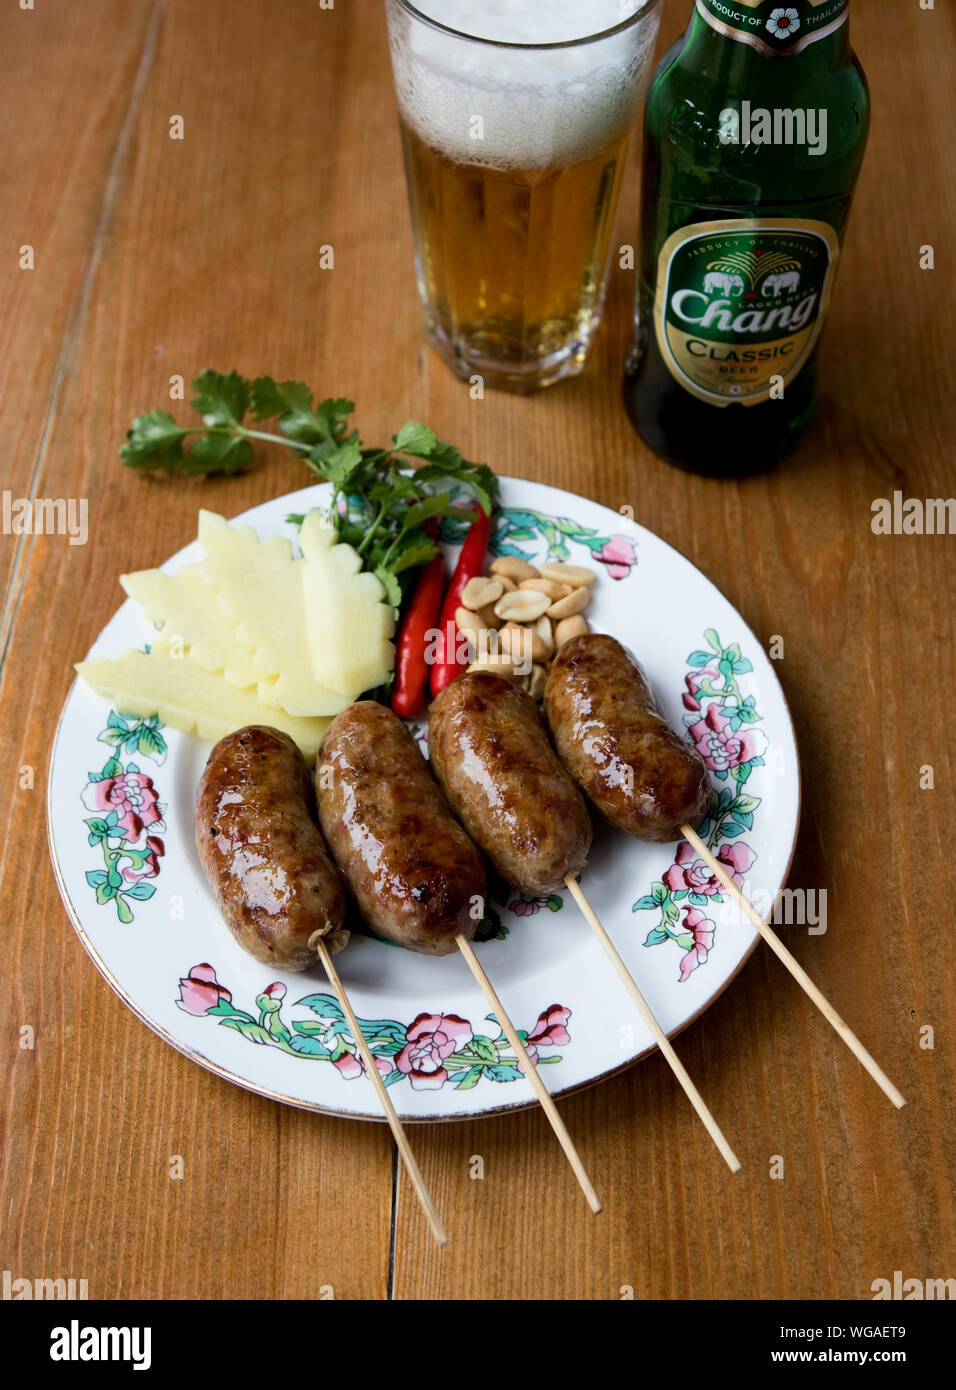 Isarn Sausages Stock Photo